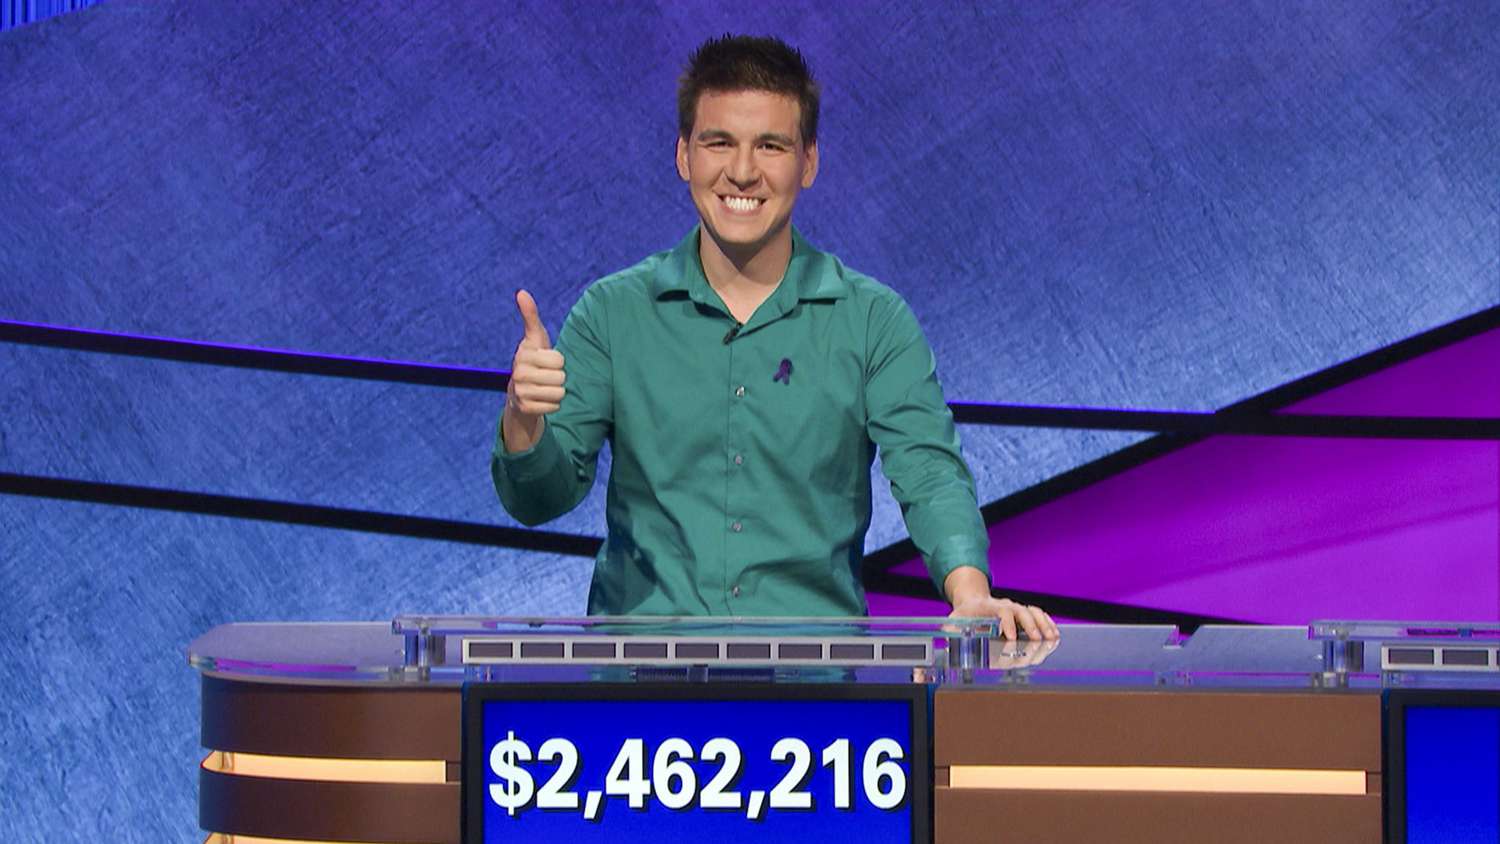 <p>The pro sports gambler changed the way Jeopardy! is played.</p>
                            